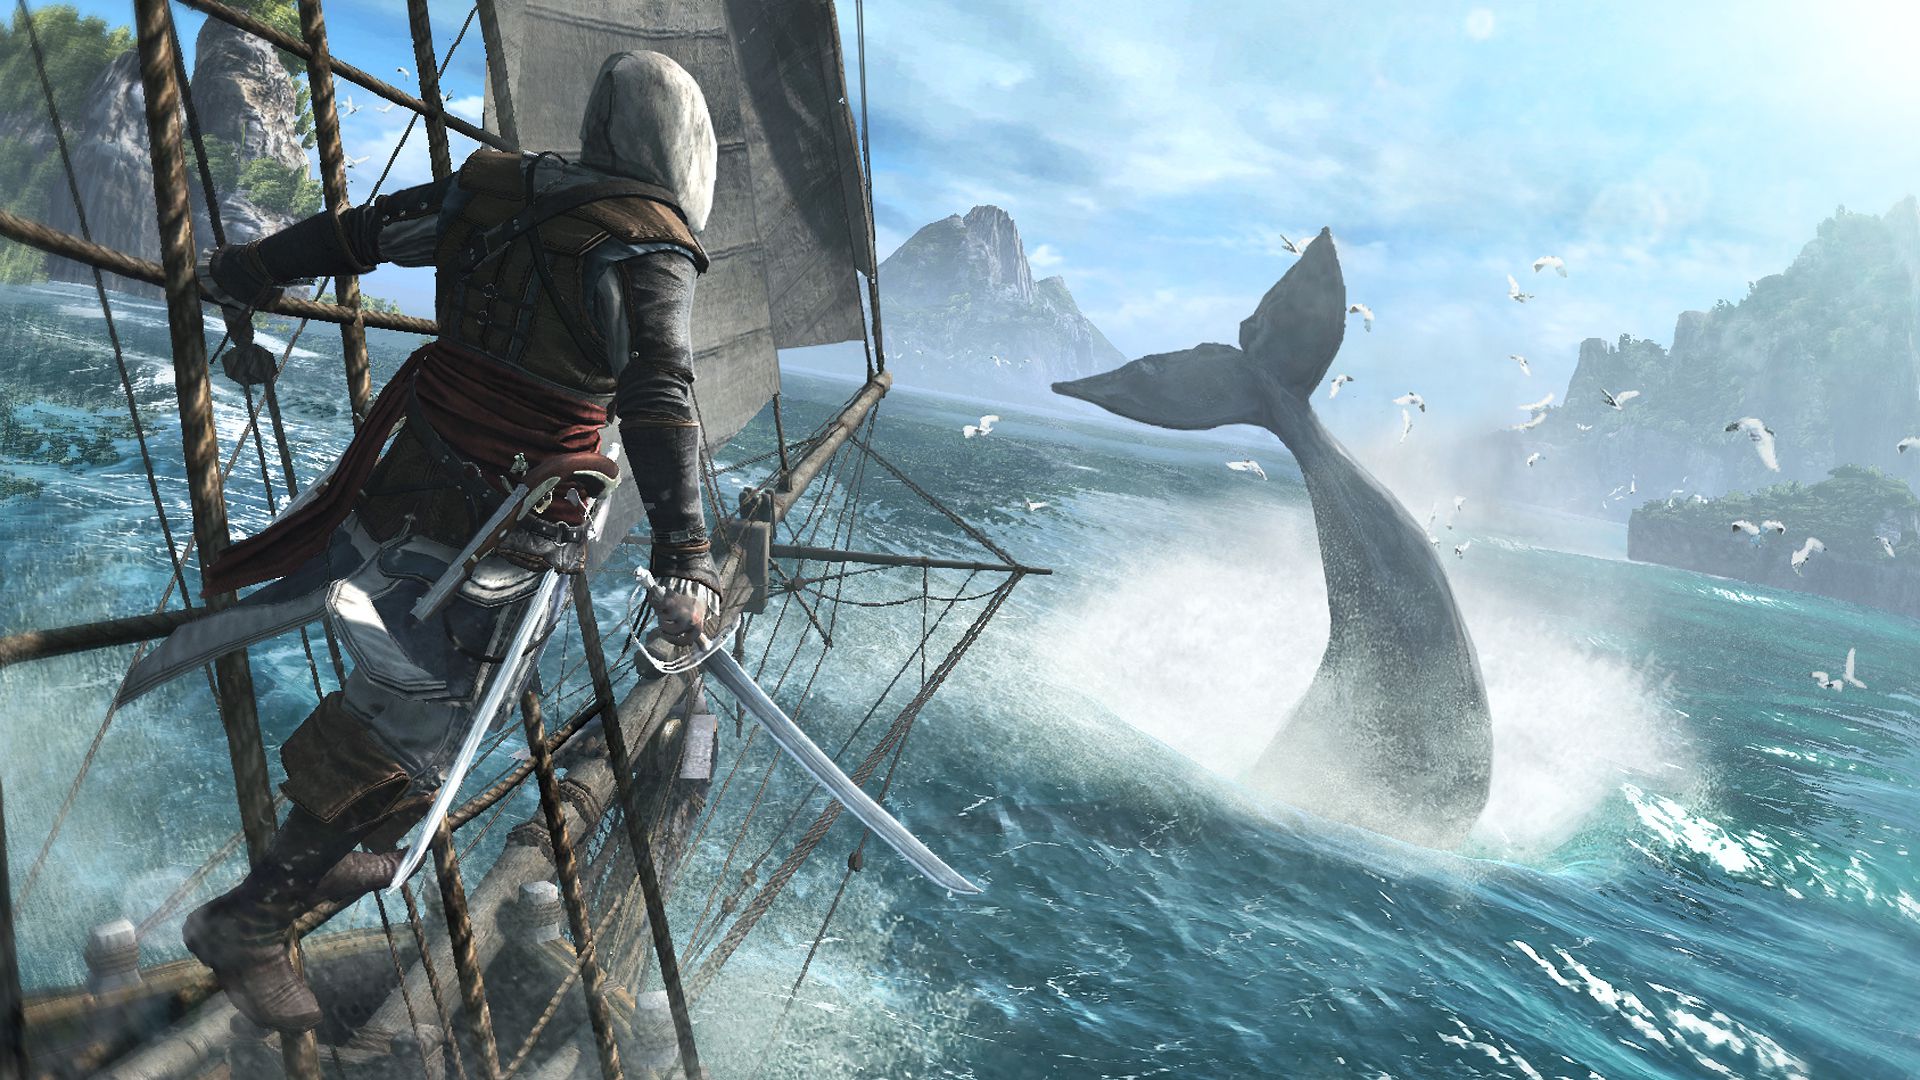 Edward Kenway spies the fluke of a whale from his pirate ship in Assassin’s Creed 4: Black Flag